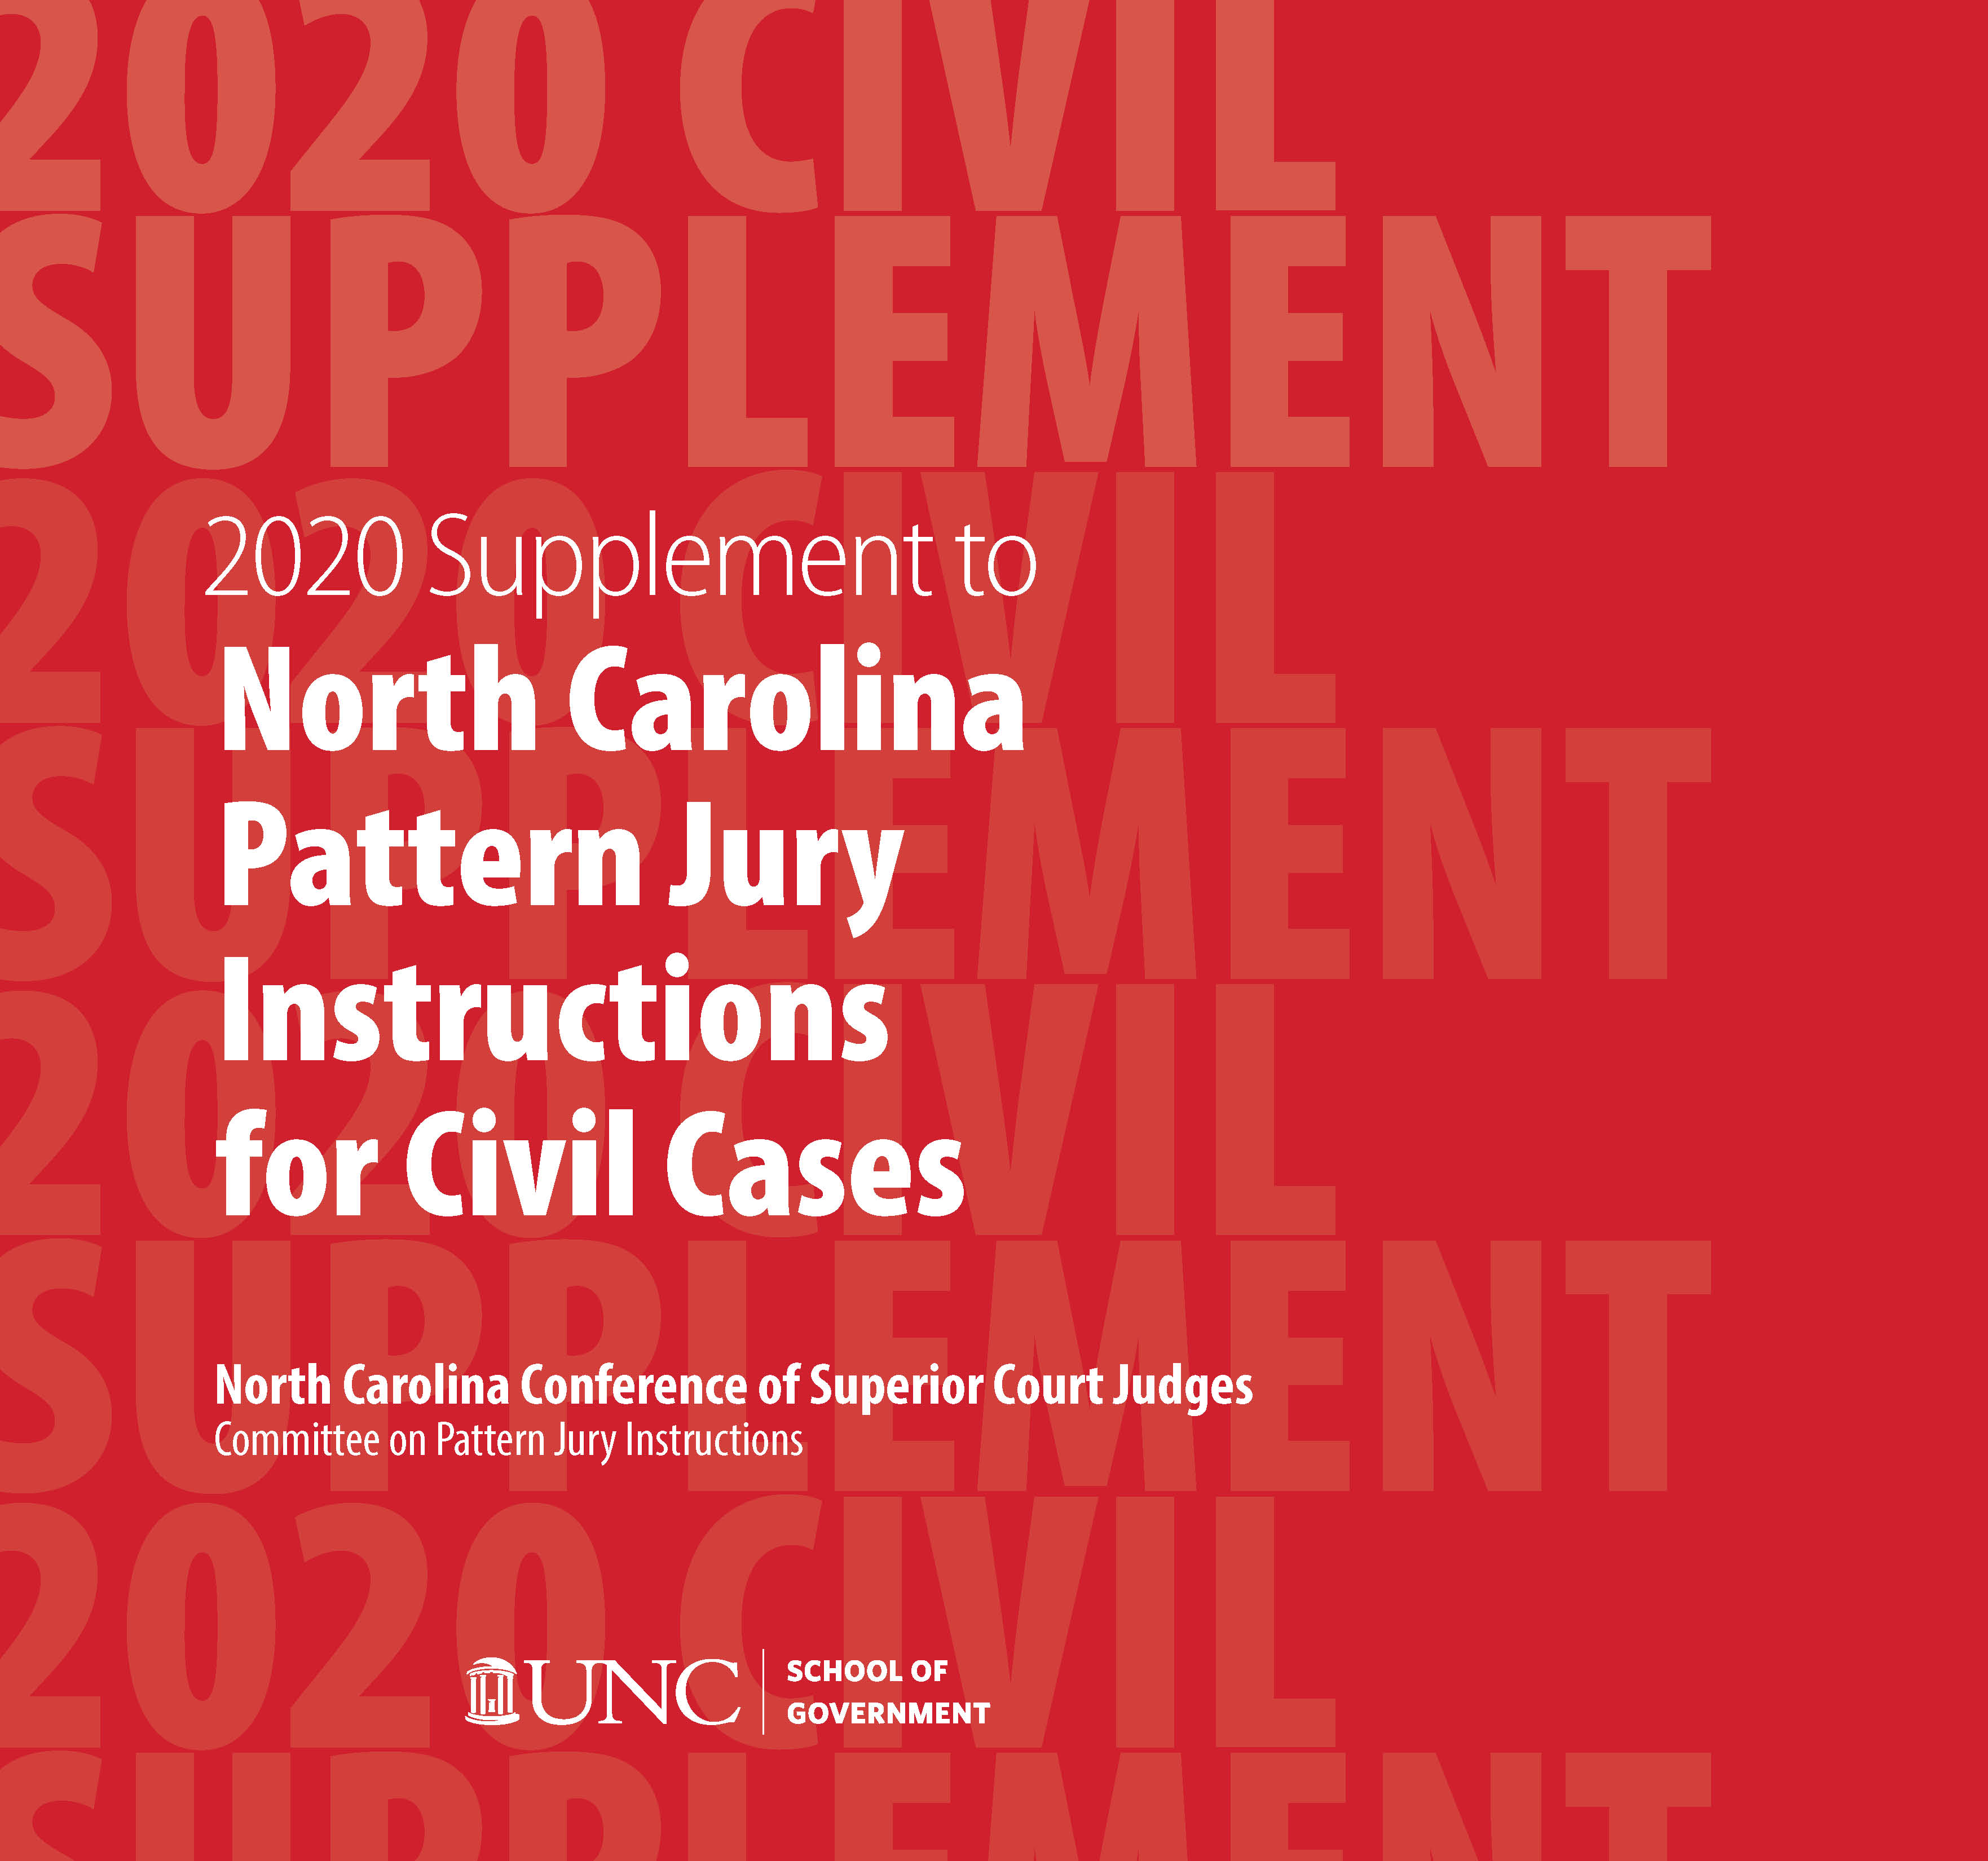 Cover image for June 2020 Supplement to North Carolina Pattern Jury Instructions for Civil Cases